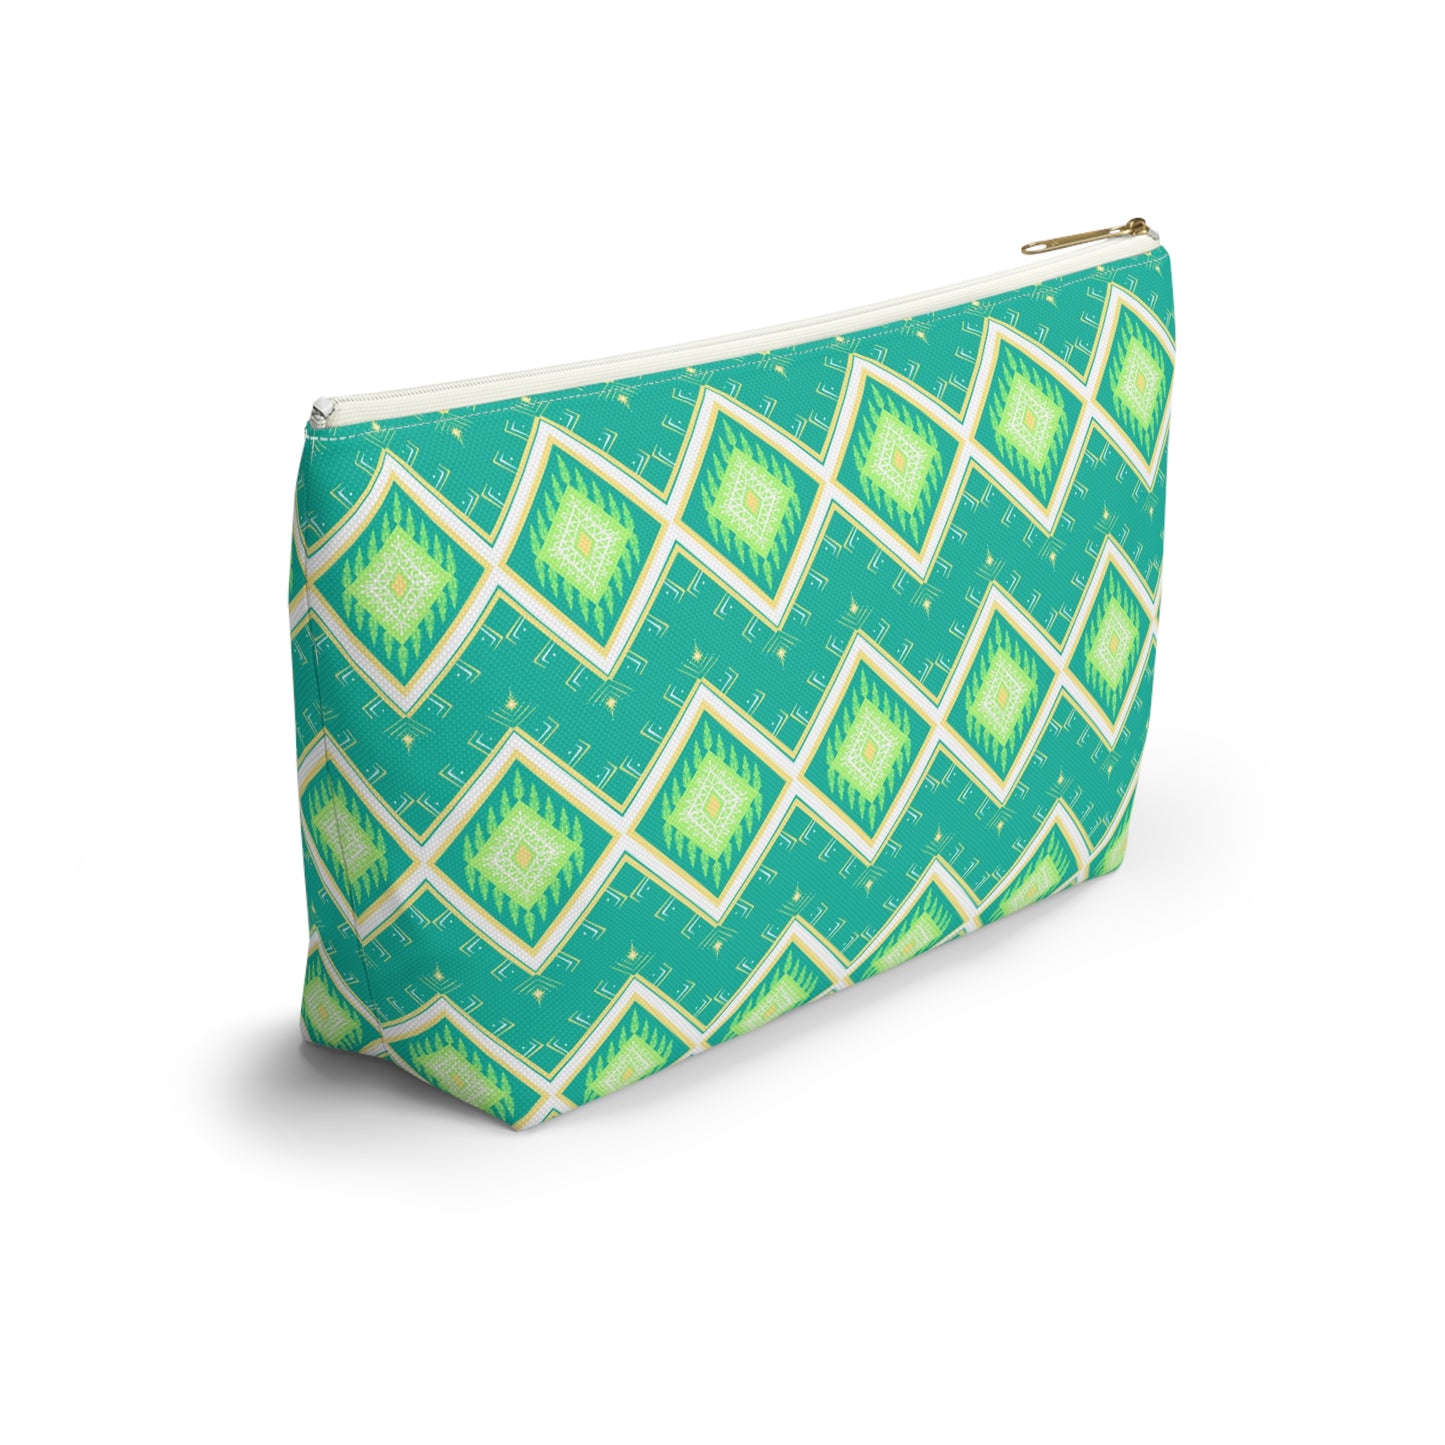 Mahjong Tile & Accessory Bag (T-bottom). Unique Colorful Mahjongg Accessory Pouch Large Enough for Tile Sets. Light Green Tribal Pattern.